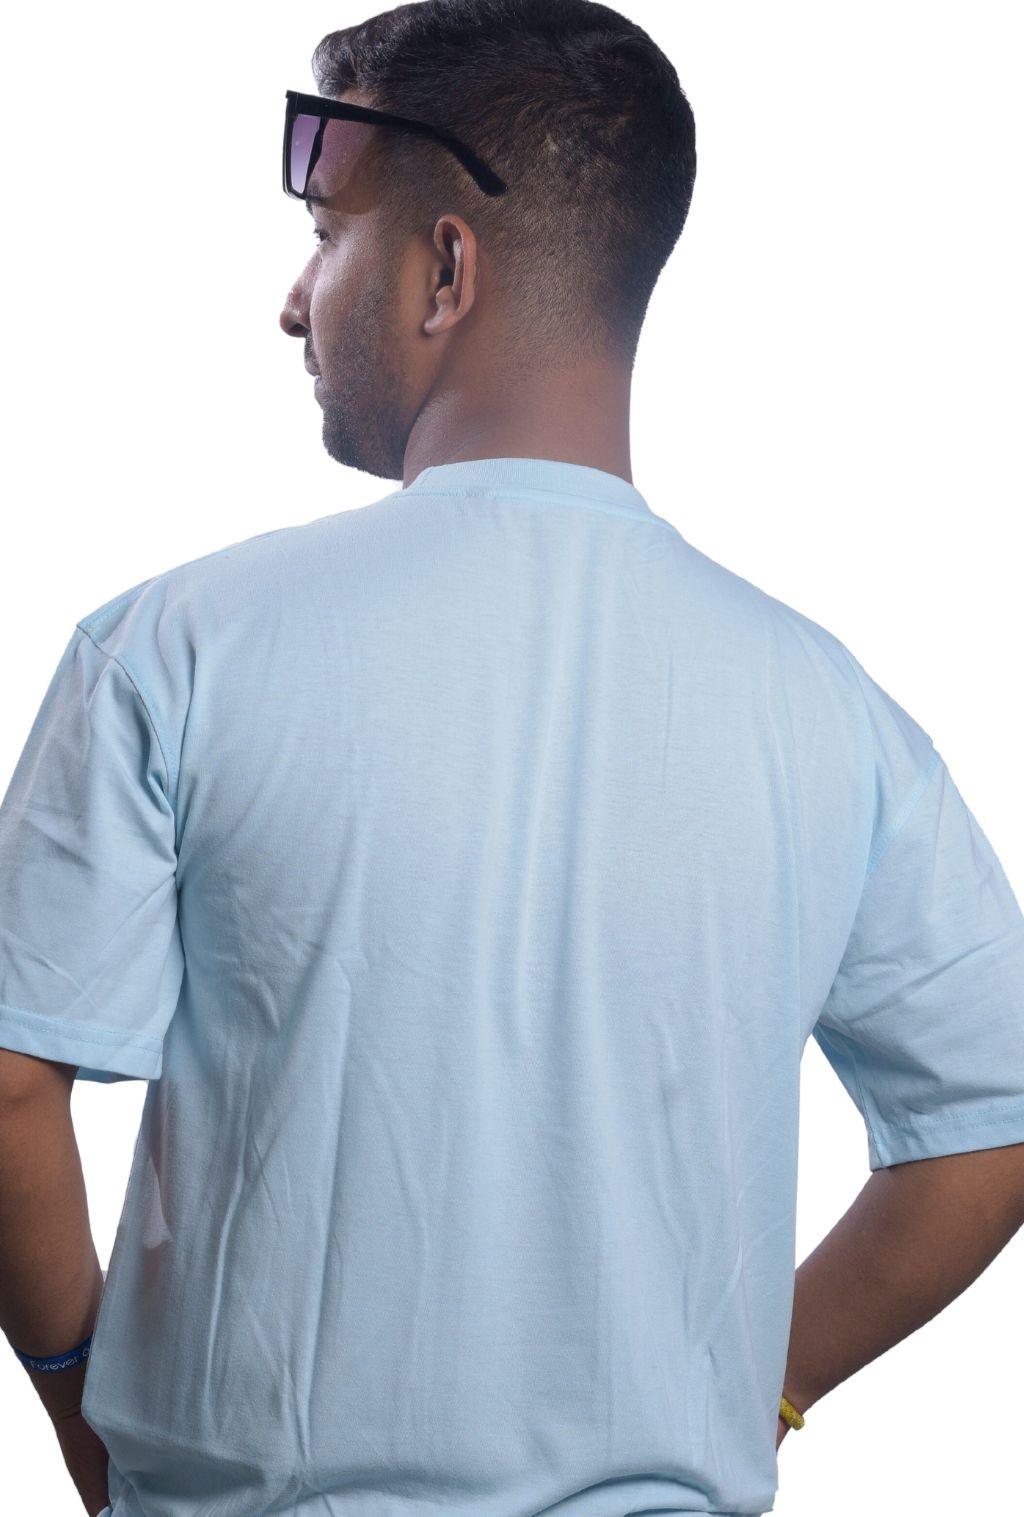 SOLID SKY BLUE T-SHIRT | Quirky Vibe - Quirky Vibe India